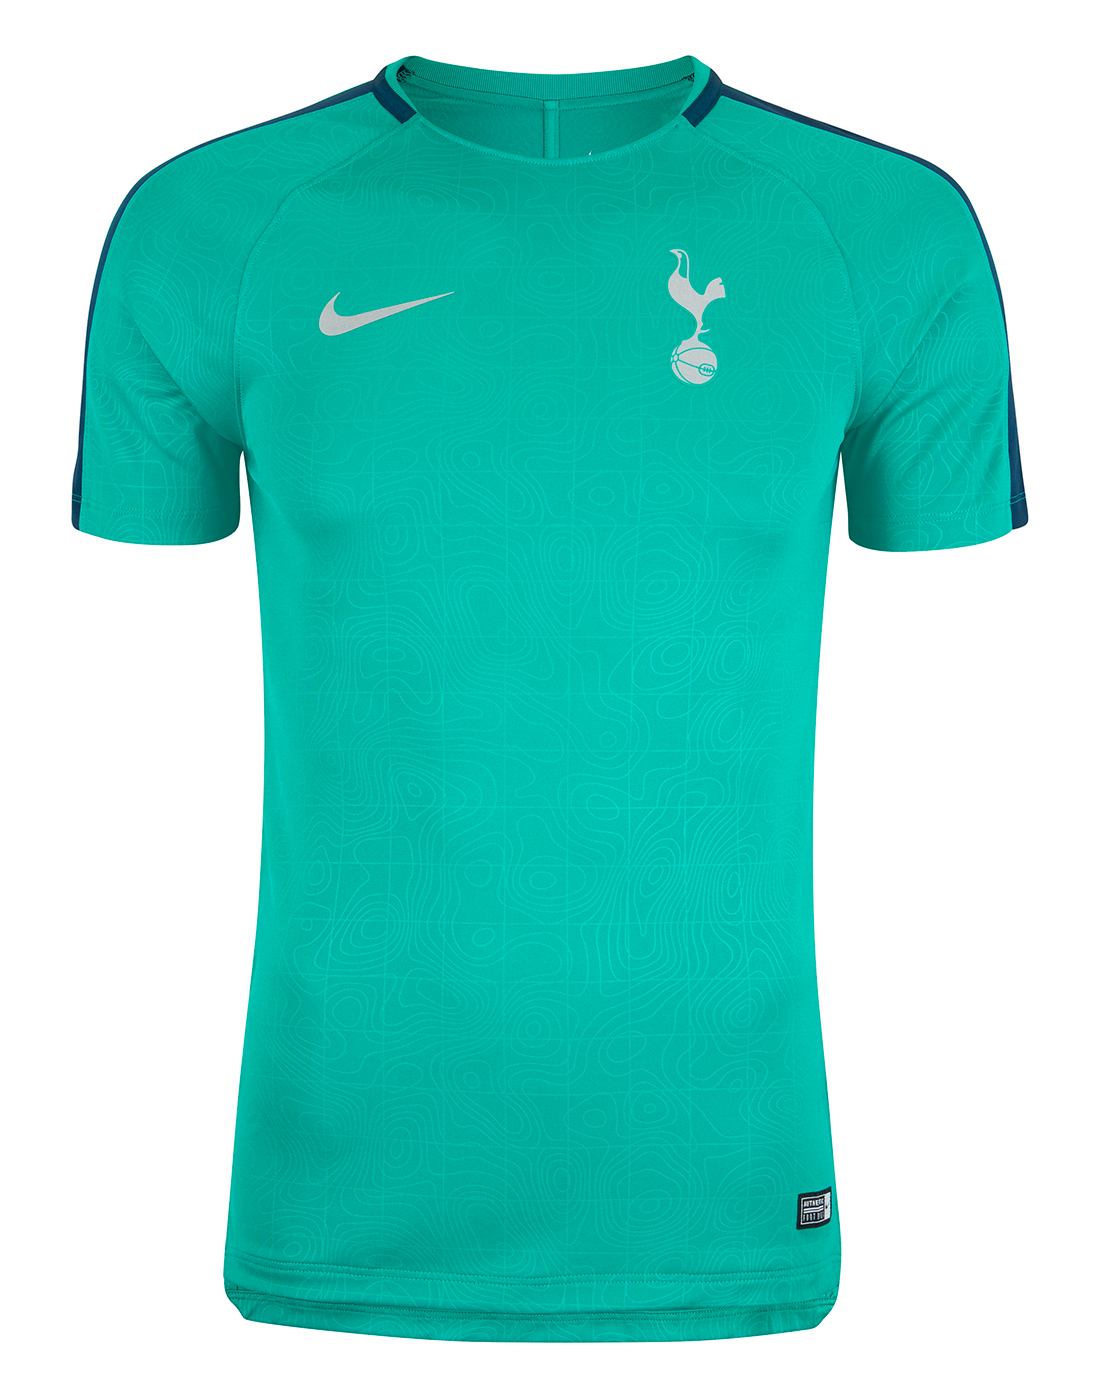 spurs turquoise jersey